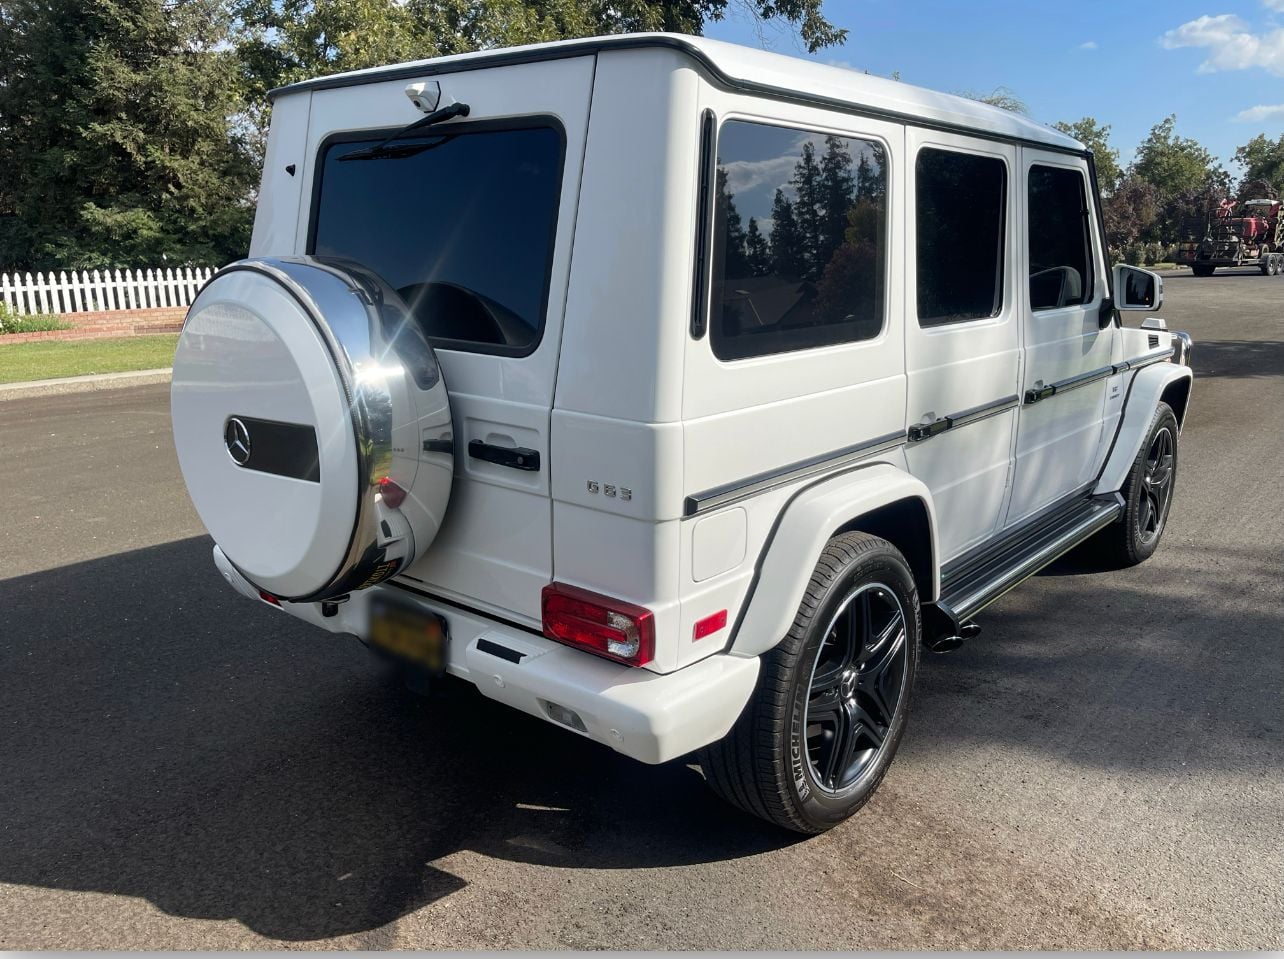 2018 Mercedes-Benz G63 AMG - Mercedes G63 Amg - Used - VIN WDCYC7DH1JX289637 - 44,000 Miles - 8 cyl - White - Fresno, CA 93706, United States